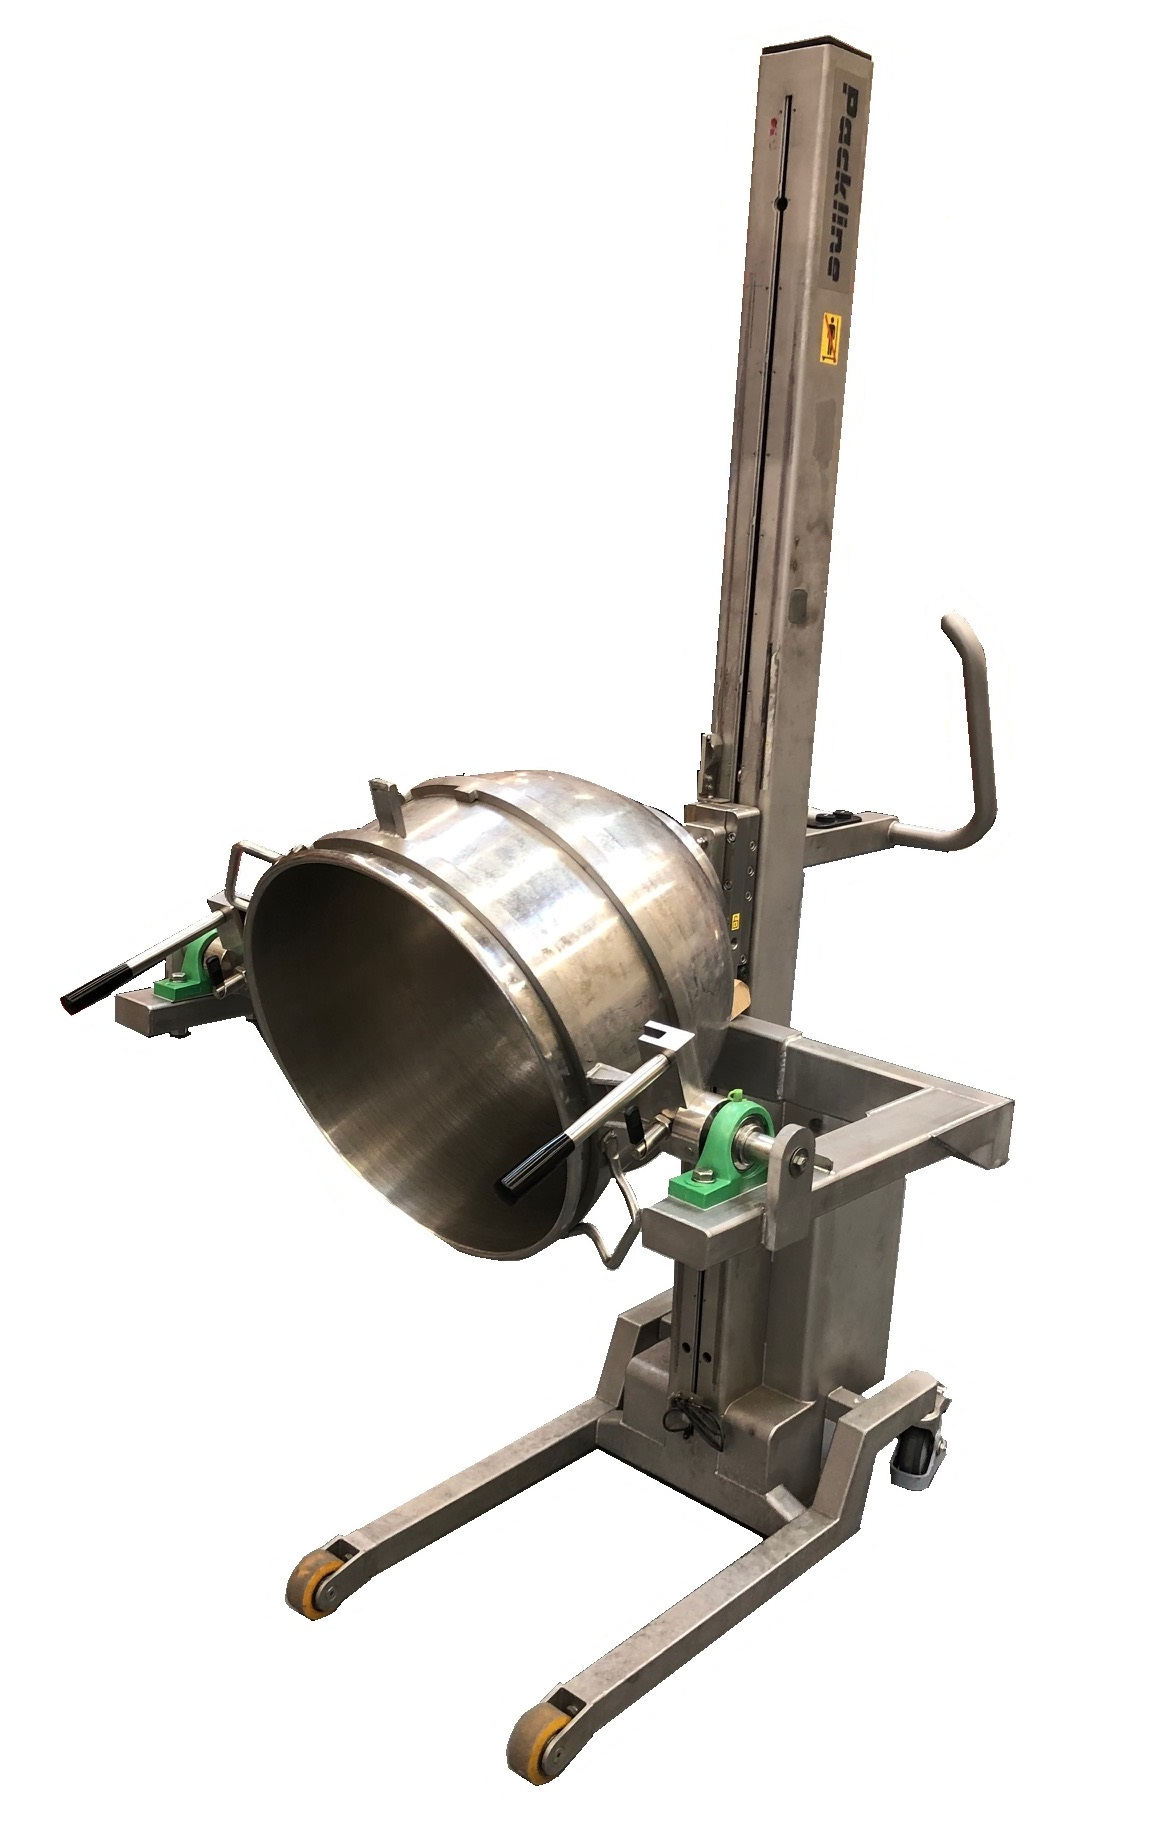 Lifting and Forward Tipping Equipment for Commercial Stainless Steel Mixing Bowls in Bakeries.